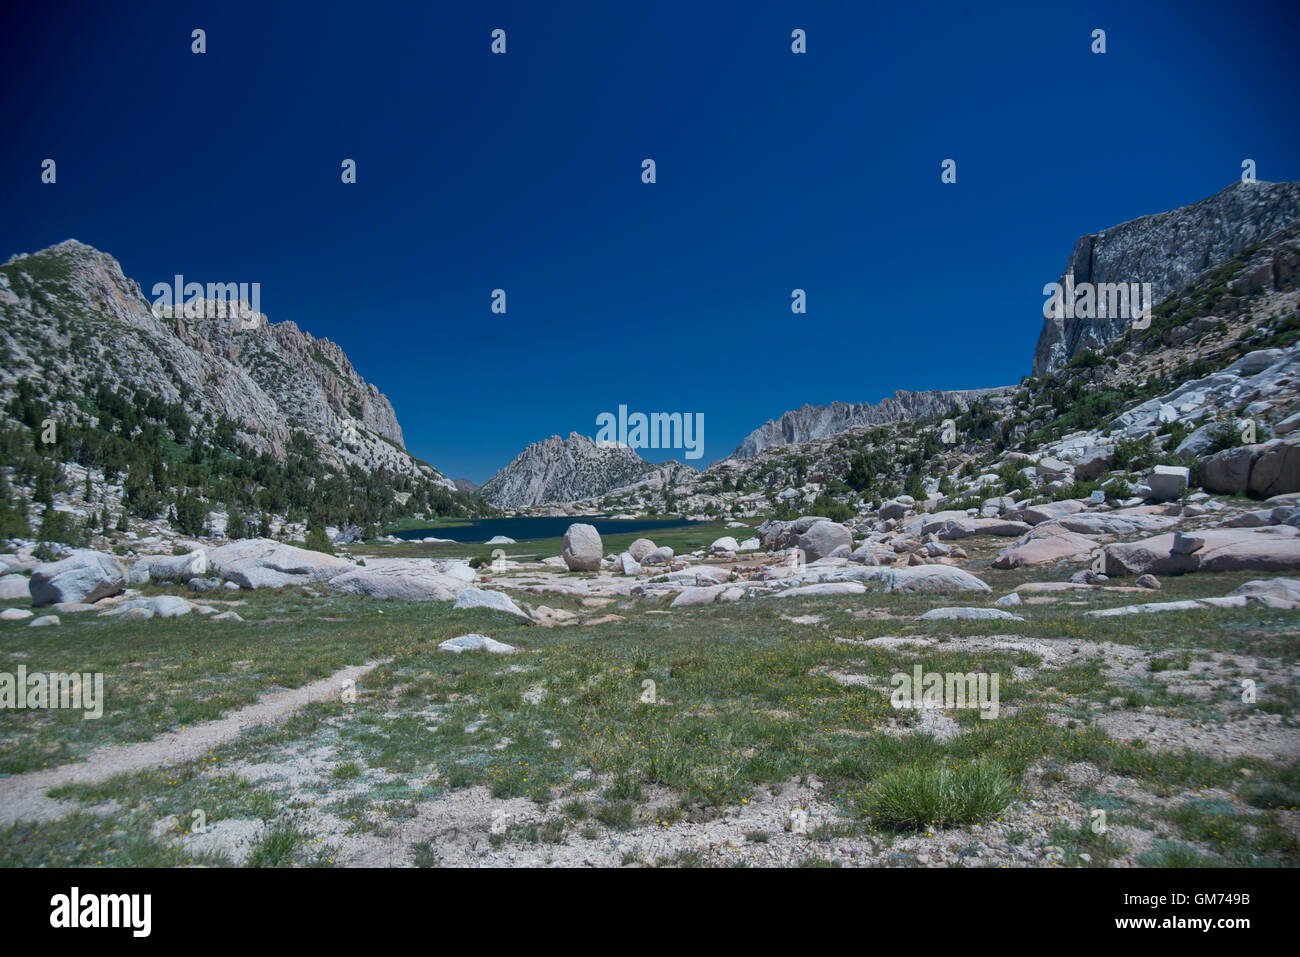 Schnee See Panoramablick in Rock Island Pass in der Hoover & Yosemite Wilderness, Humbolt-Toiyabe National Forest, CA Stockfoto